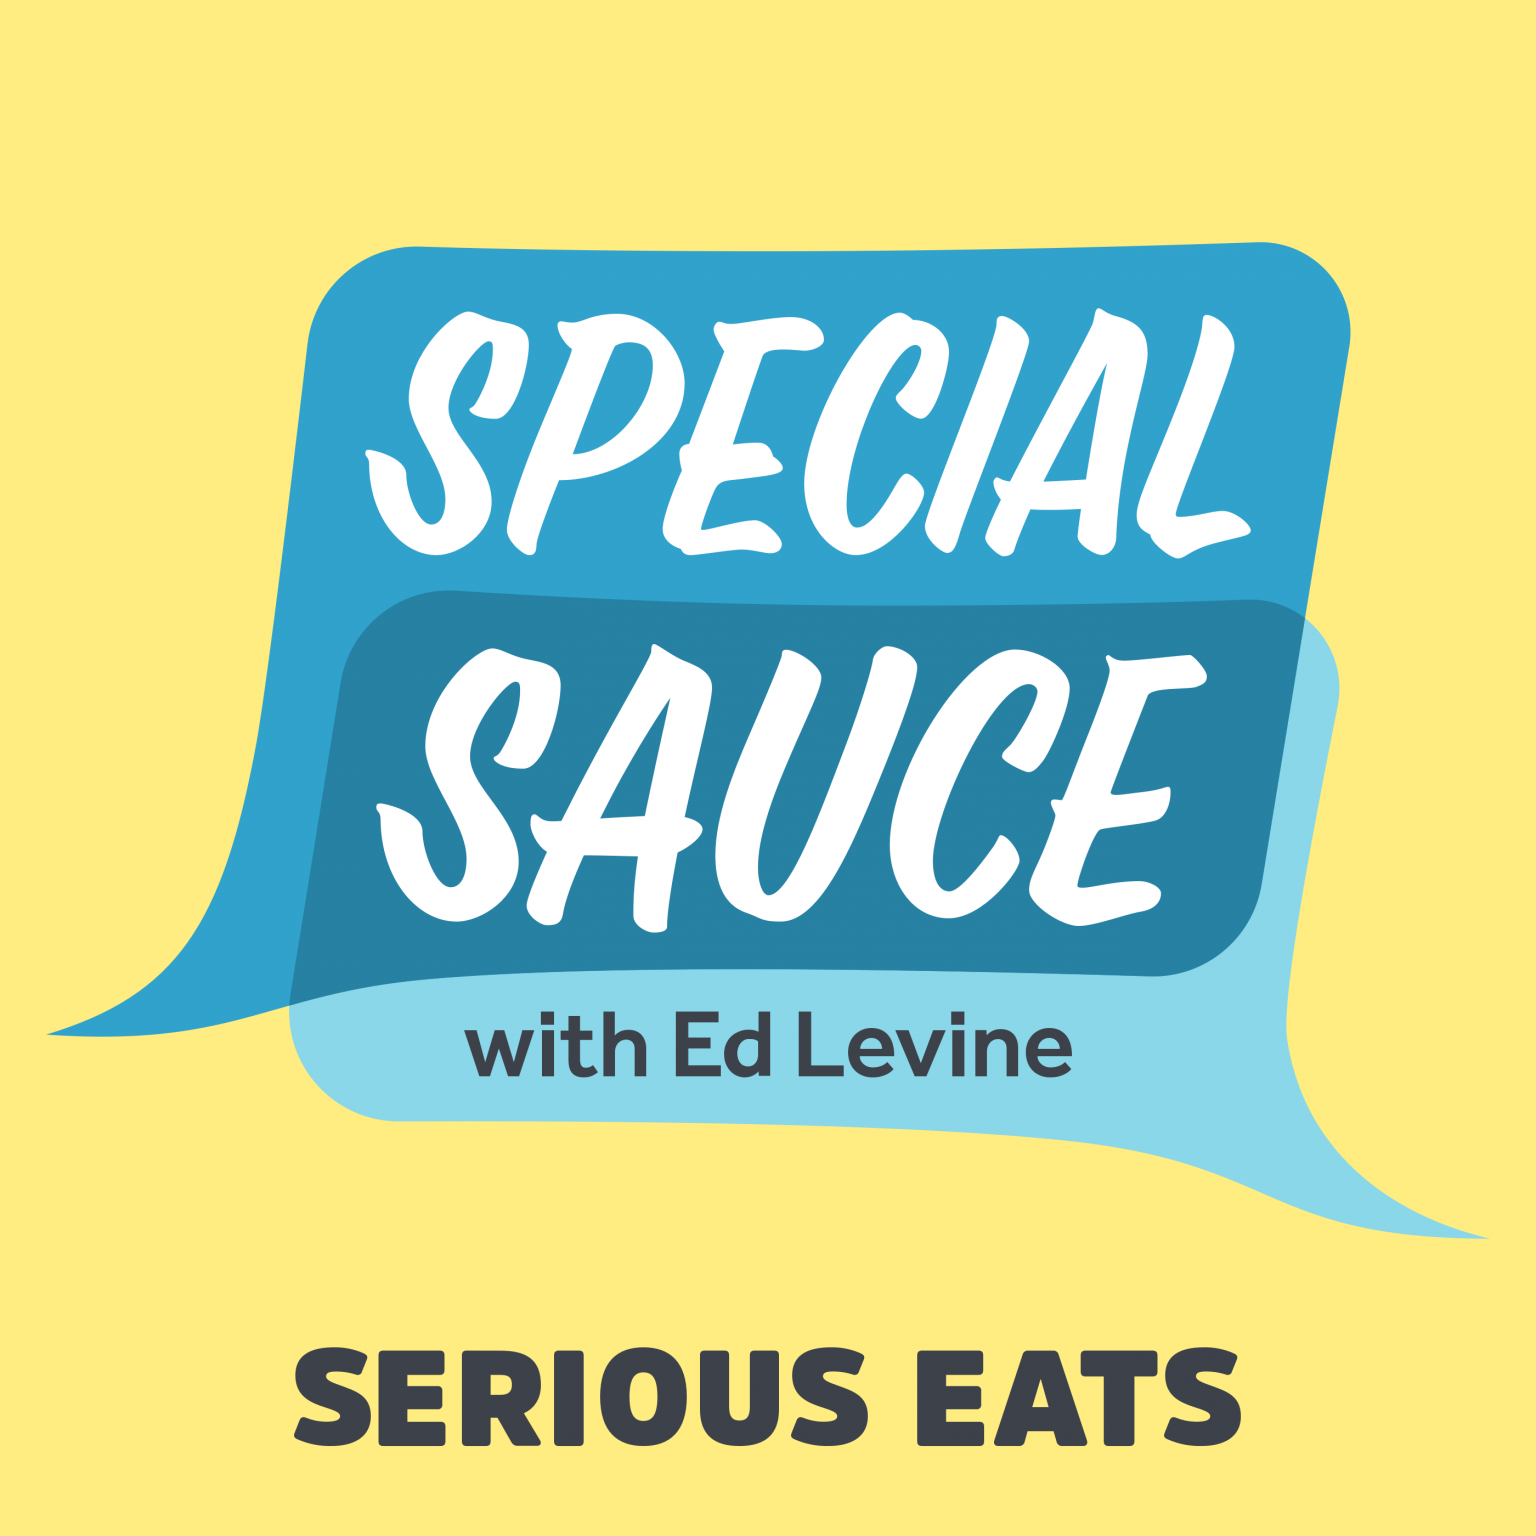 Special Sauce: “Ask Kenji” Is Back! And Anne Saxelby and Sheila Flanagan on Selling Cheese During the Pandemic [1/2]